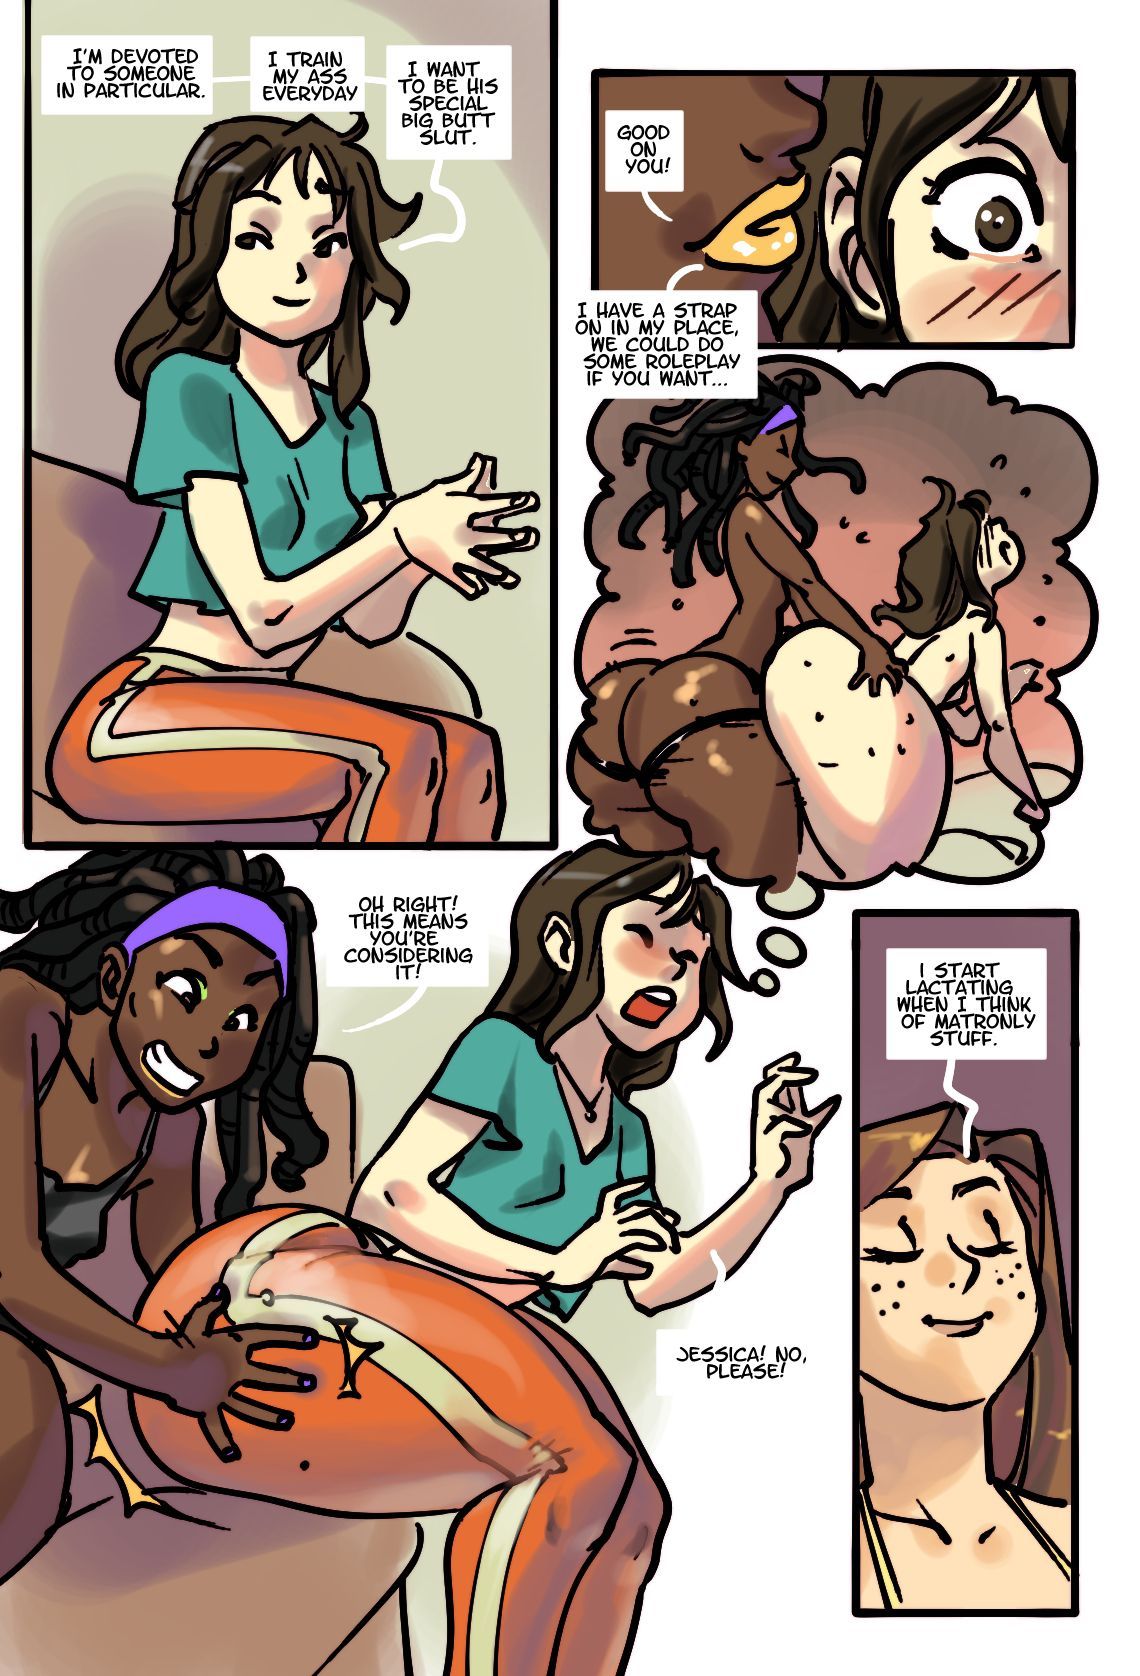 [Sidneymt] Thought Bubble #14-15-16 [Ongoing] 12